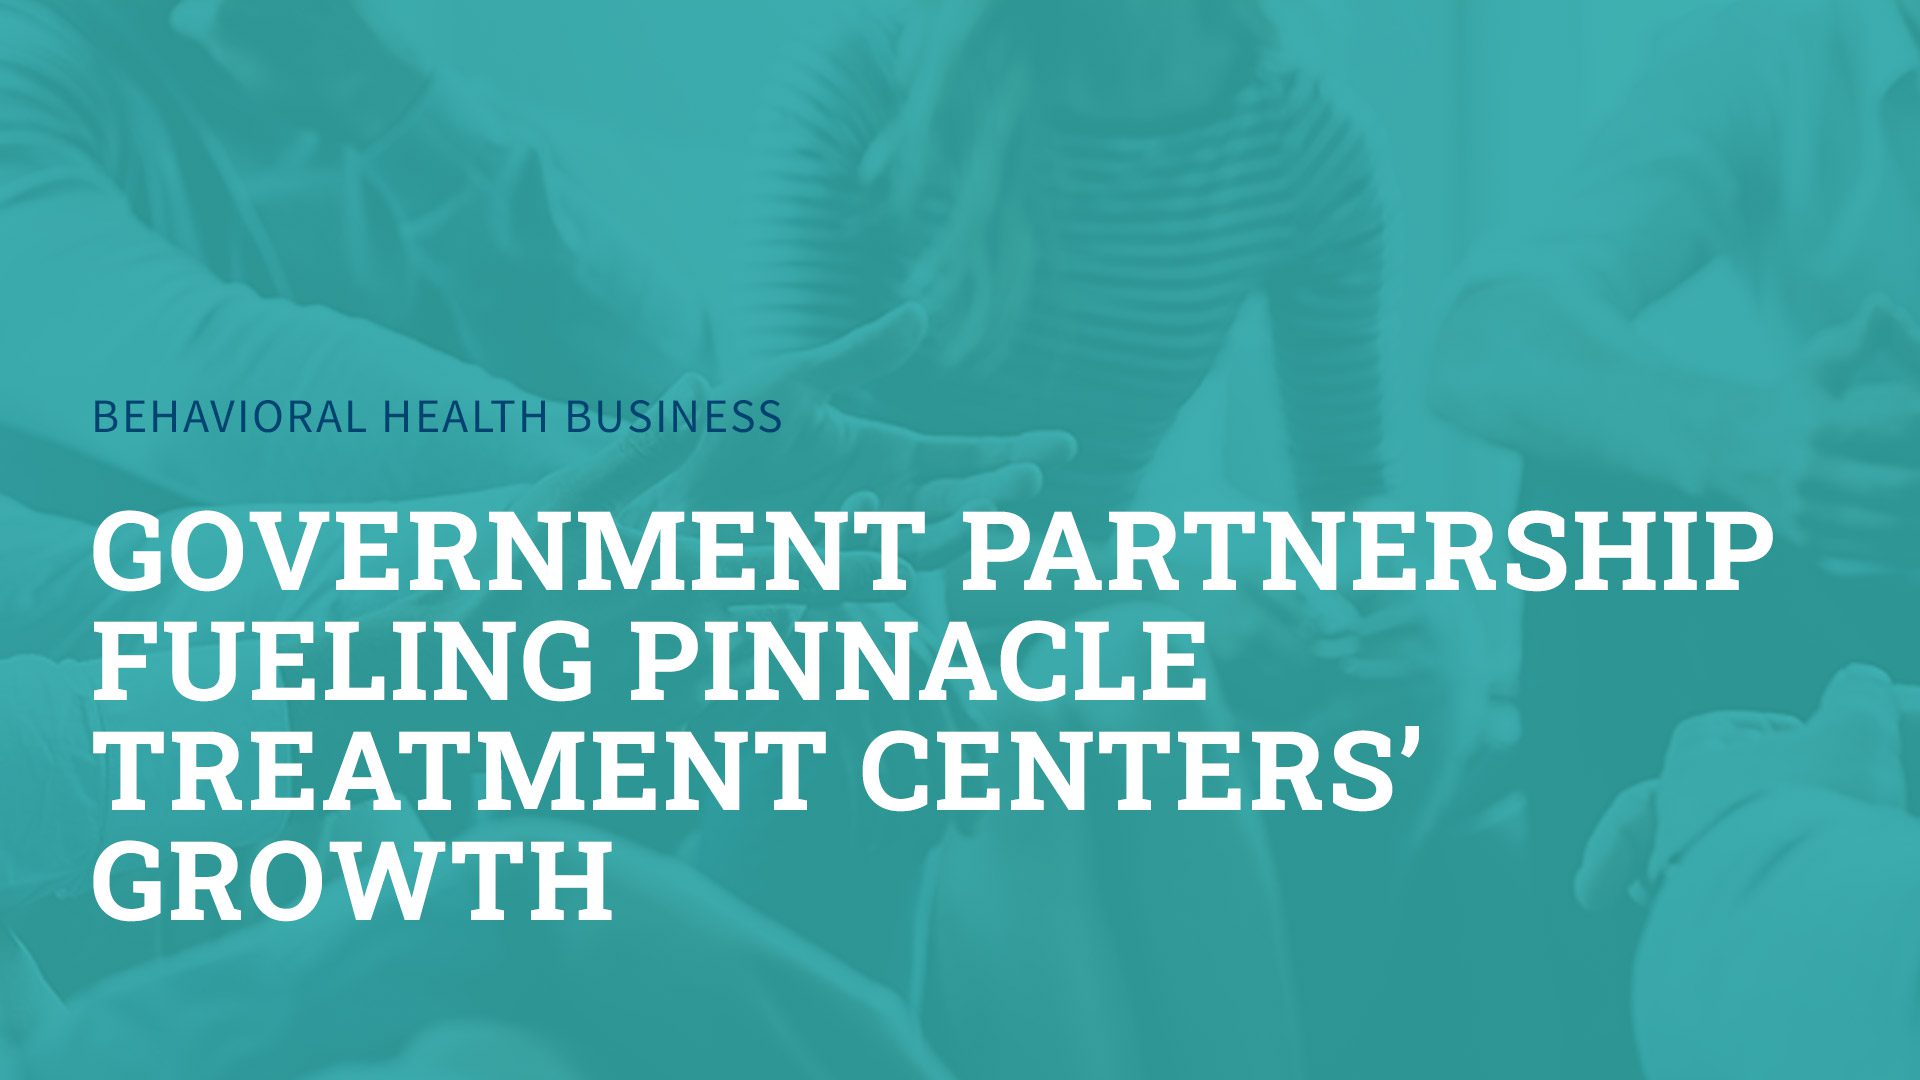 Government Partnership Fueling Pinnacle Treatment Centers’ Growth